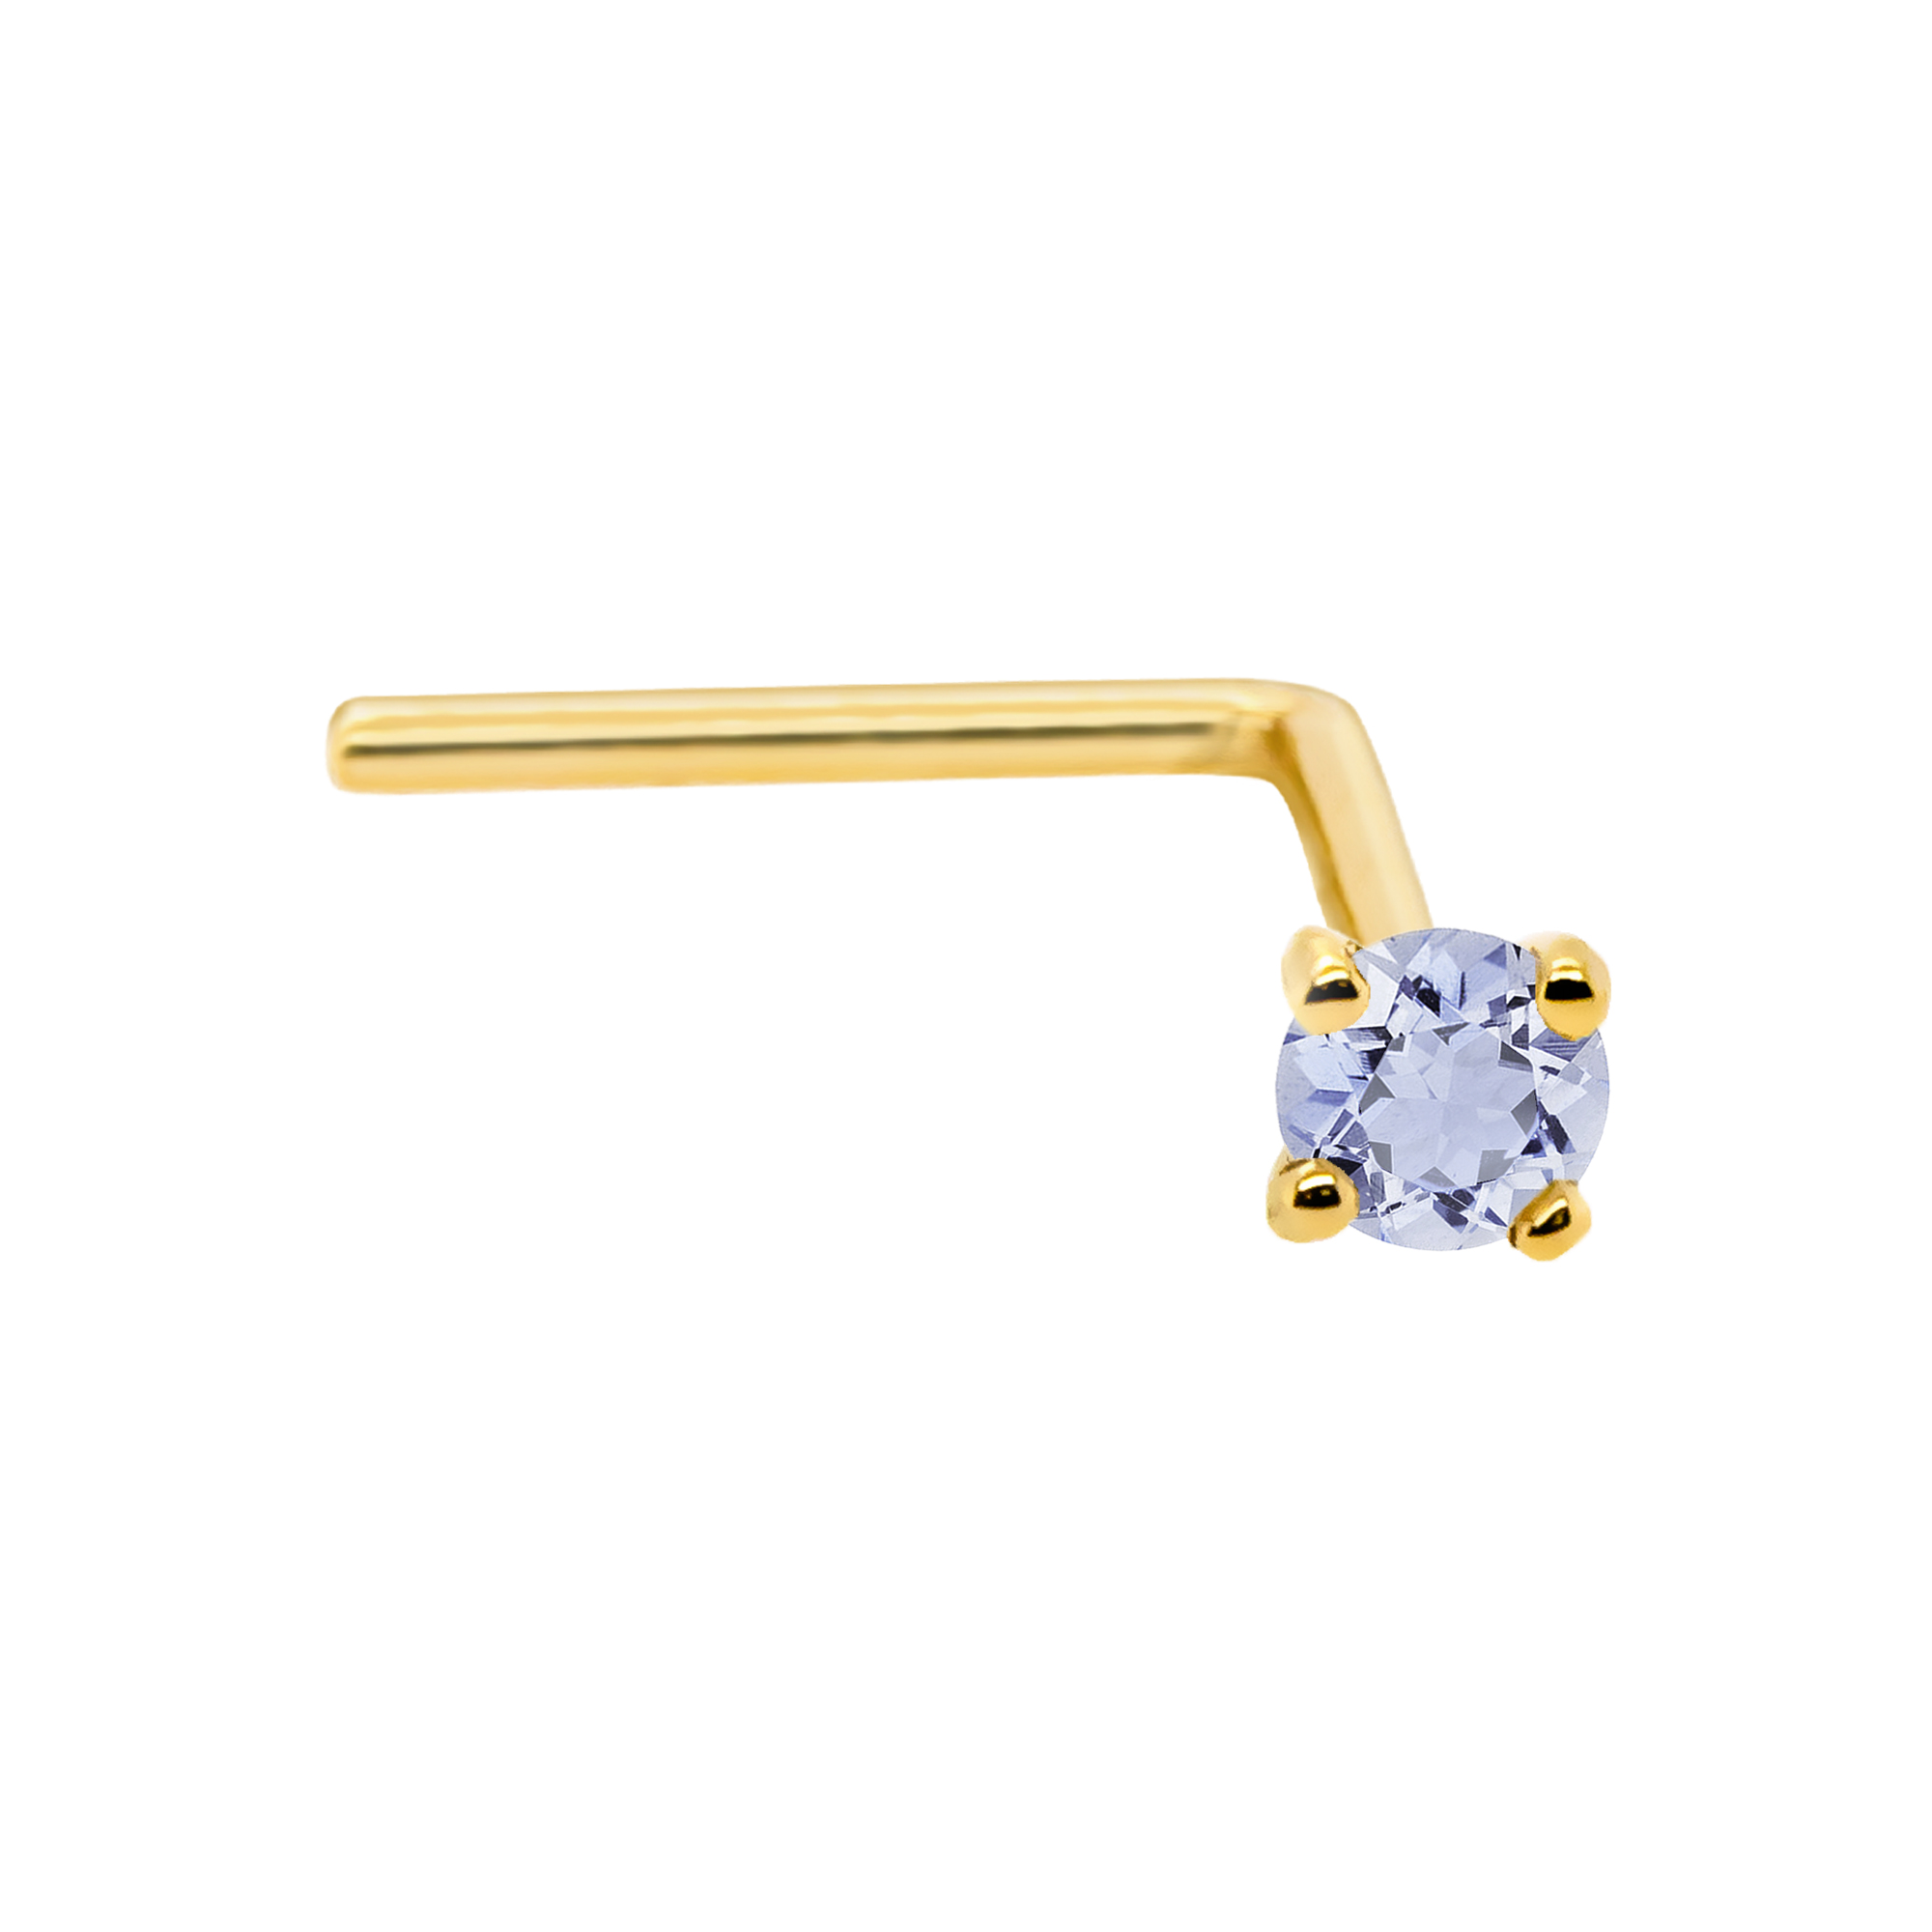 22G Solid 14Kt Gold L-Shape Nose Stud with real Tanzanite Gemstone, 14kt Yellow Gold or 14kt White Gold Prong Setting - December Birthstone Nose Ring